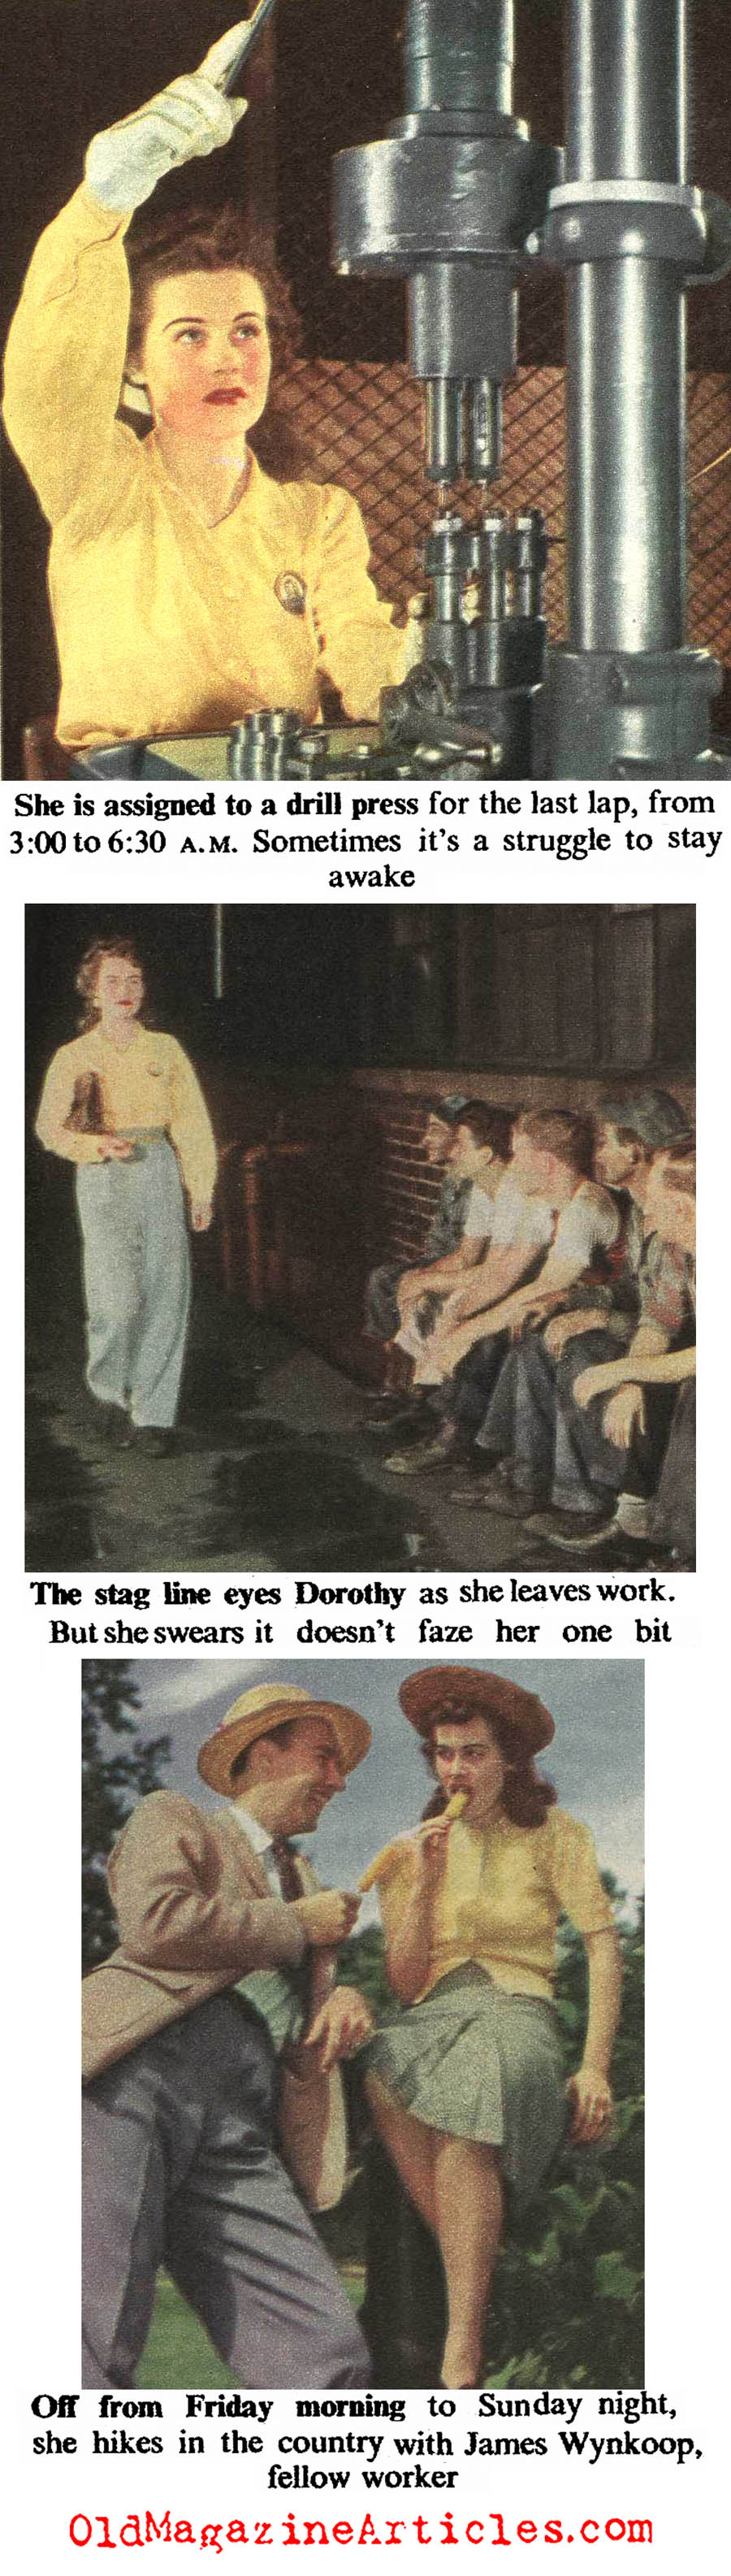 She Worked The Graveyard Shift (The American Magazine, 1943)